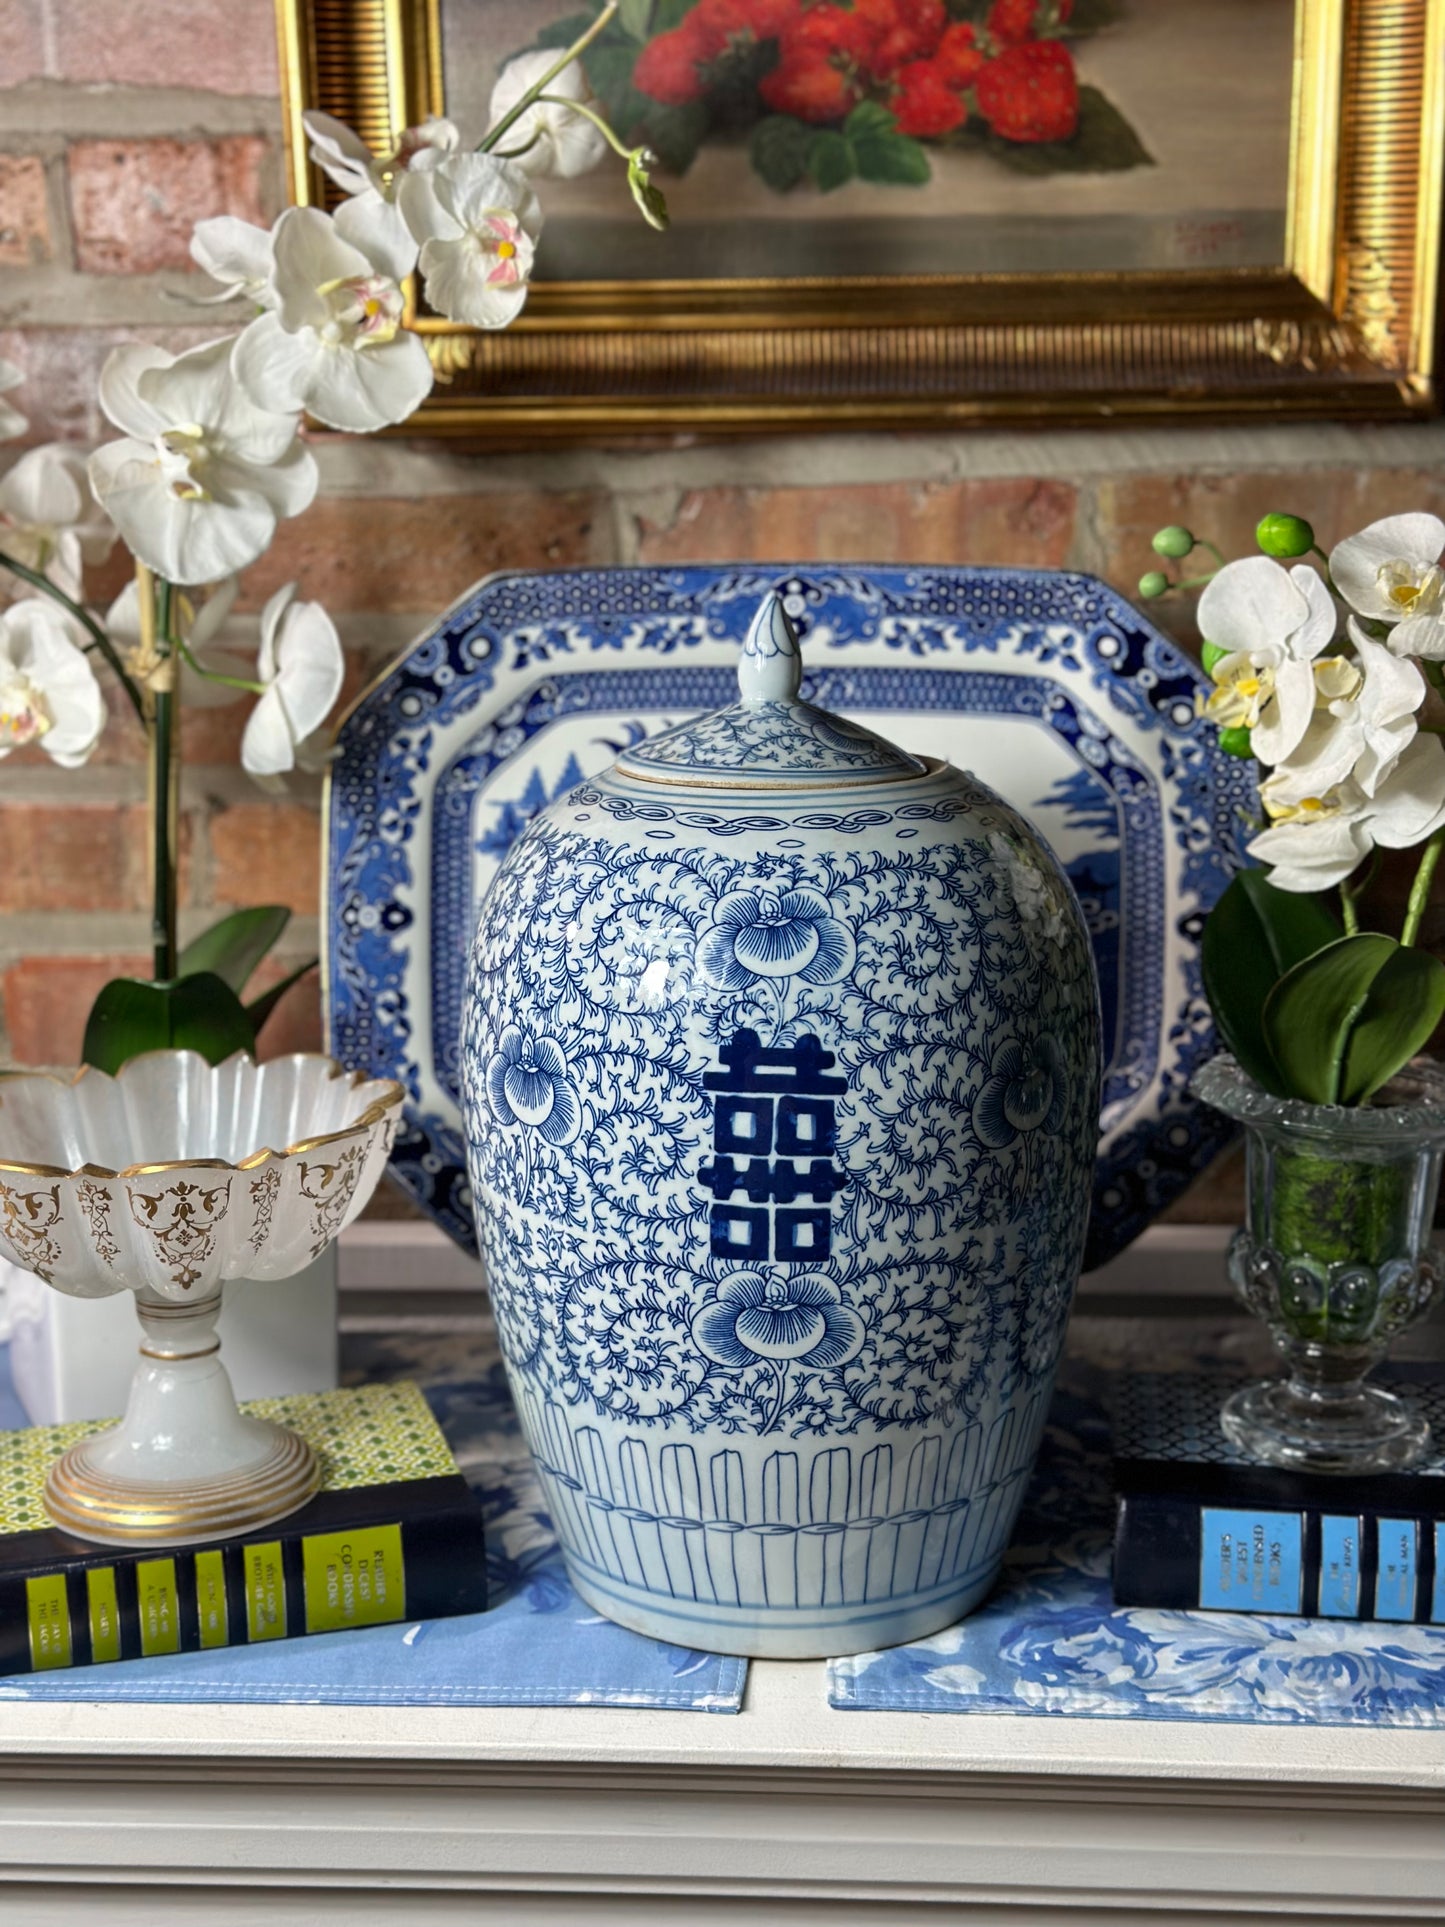 NEW - Blue & White Double Happiness Melon Ginger Jar, 14" Tall